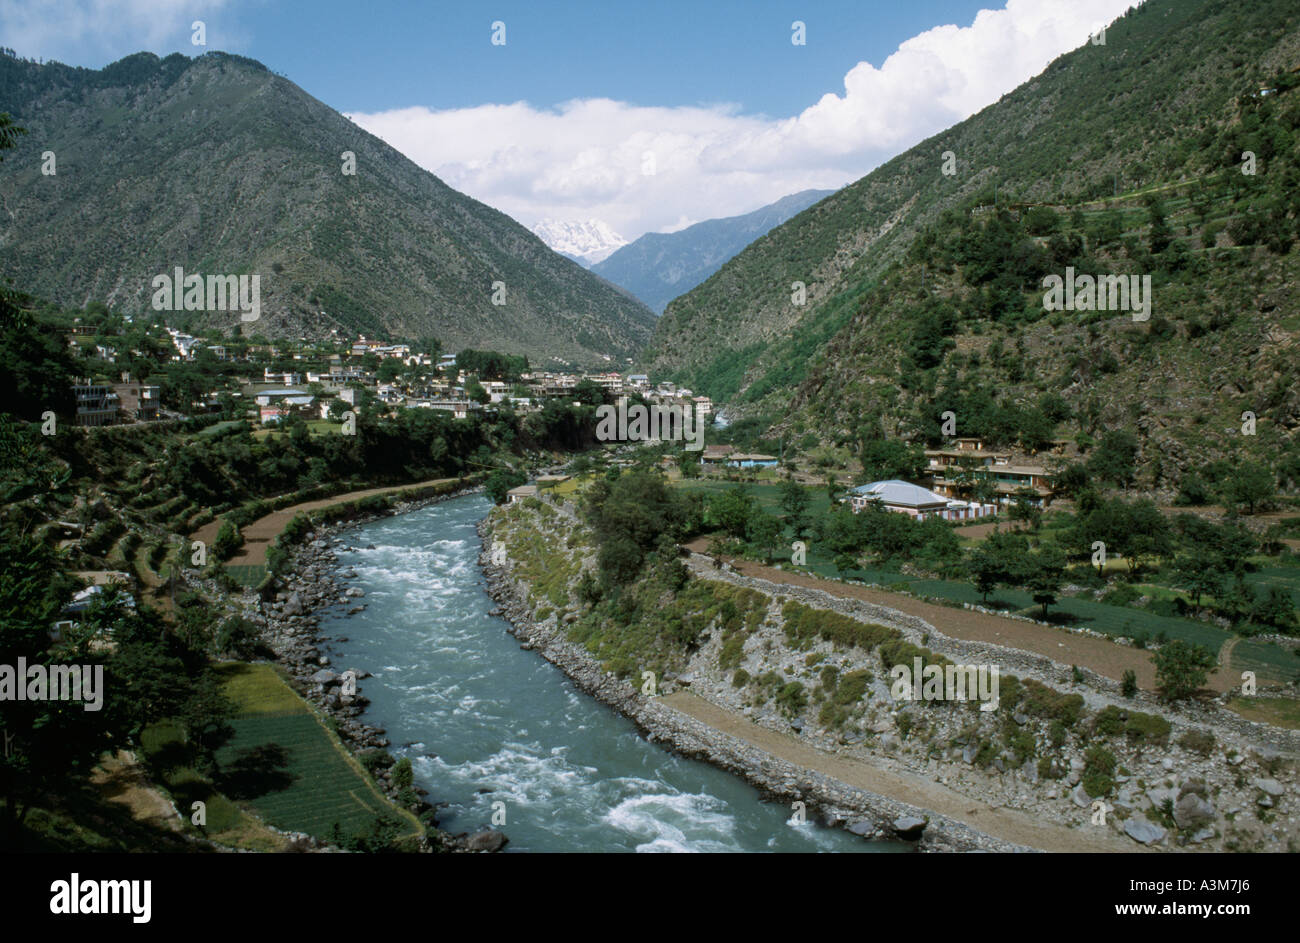 View upriver towards the town of Bahrain in the Swat Valley, Pakistan. Stock Photo